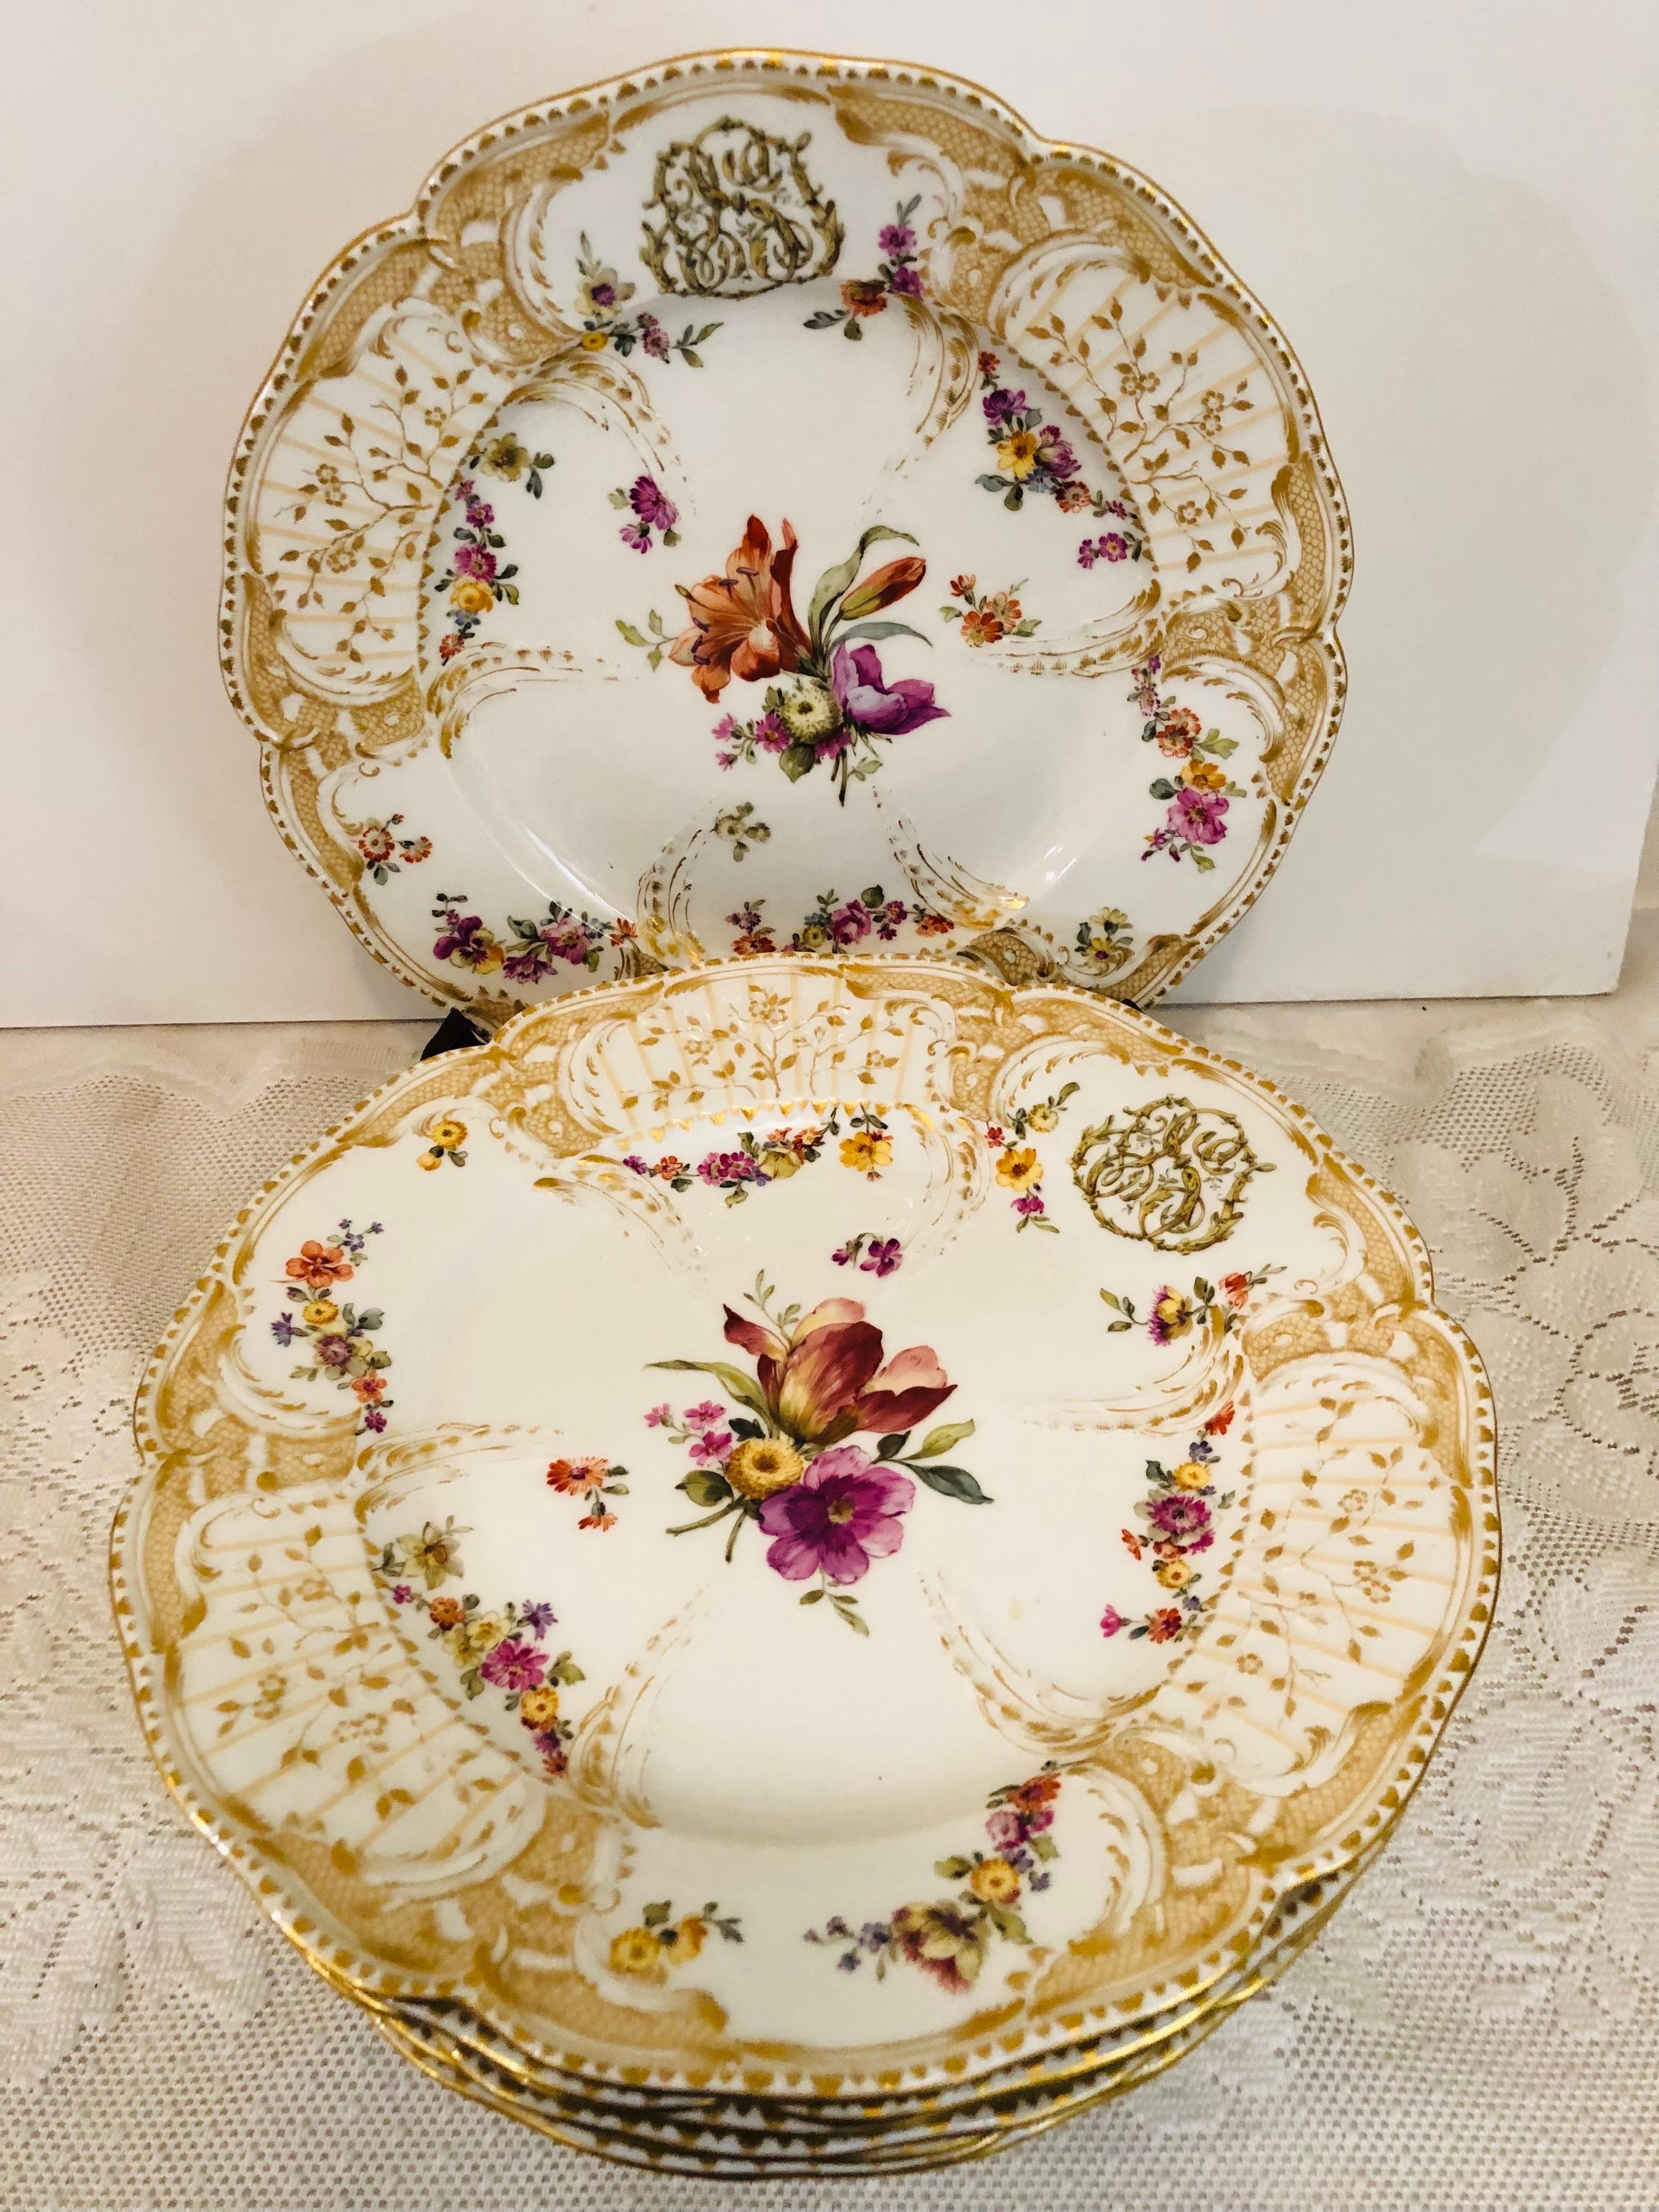 This set of KPM plates and bowls is painted in the manner of the first Potsdam Service made for the palace of Friedrich the Second, (1712-1786), who founded KPM porcelain in 1763. It includes eight dinner plates and six wide rim soup bowls. The